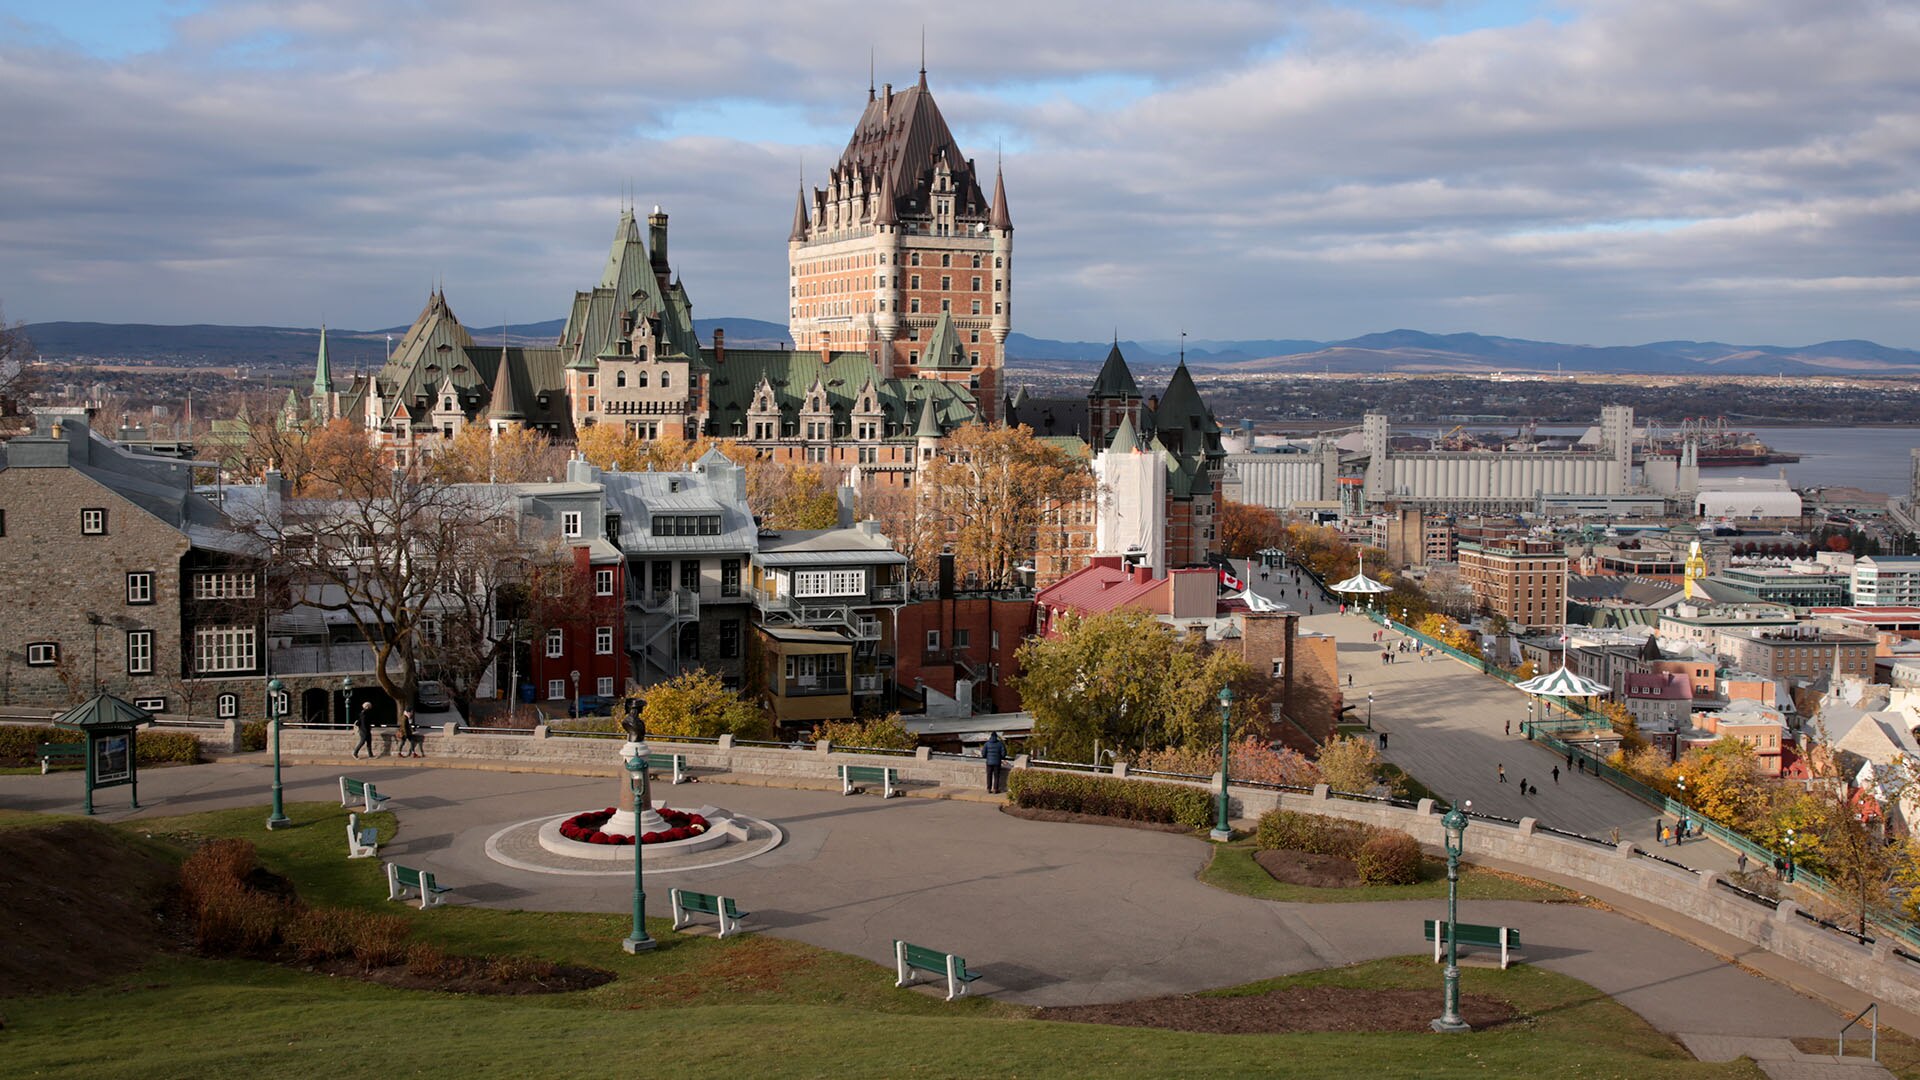 Above photo: From Bastion de la Reine Park, the Fairmont Le Chateau Frontenac dominates the skyline. The Terrasse Dufferin walkway is seen on the lower right.